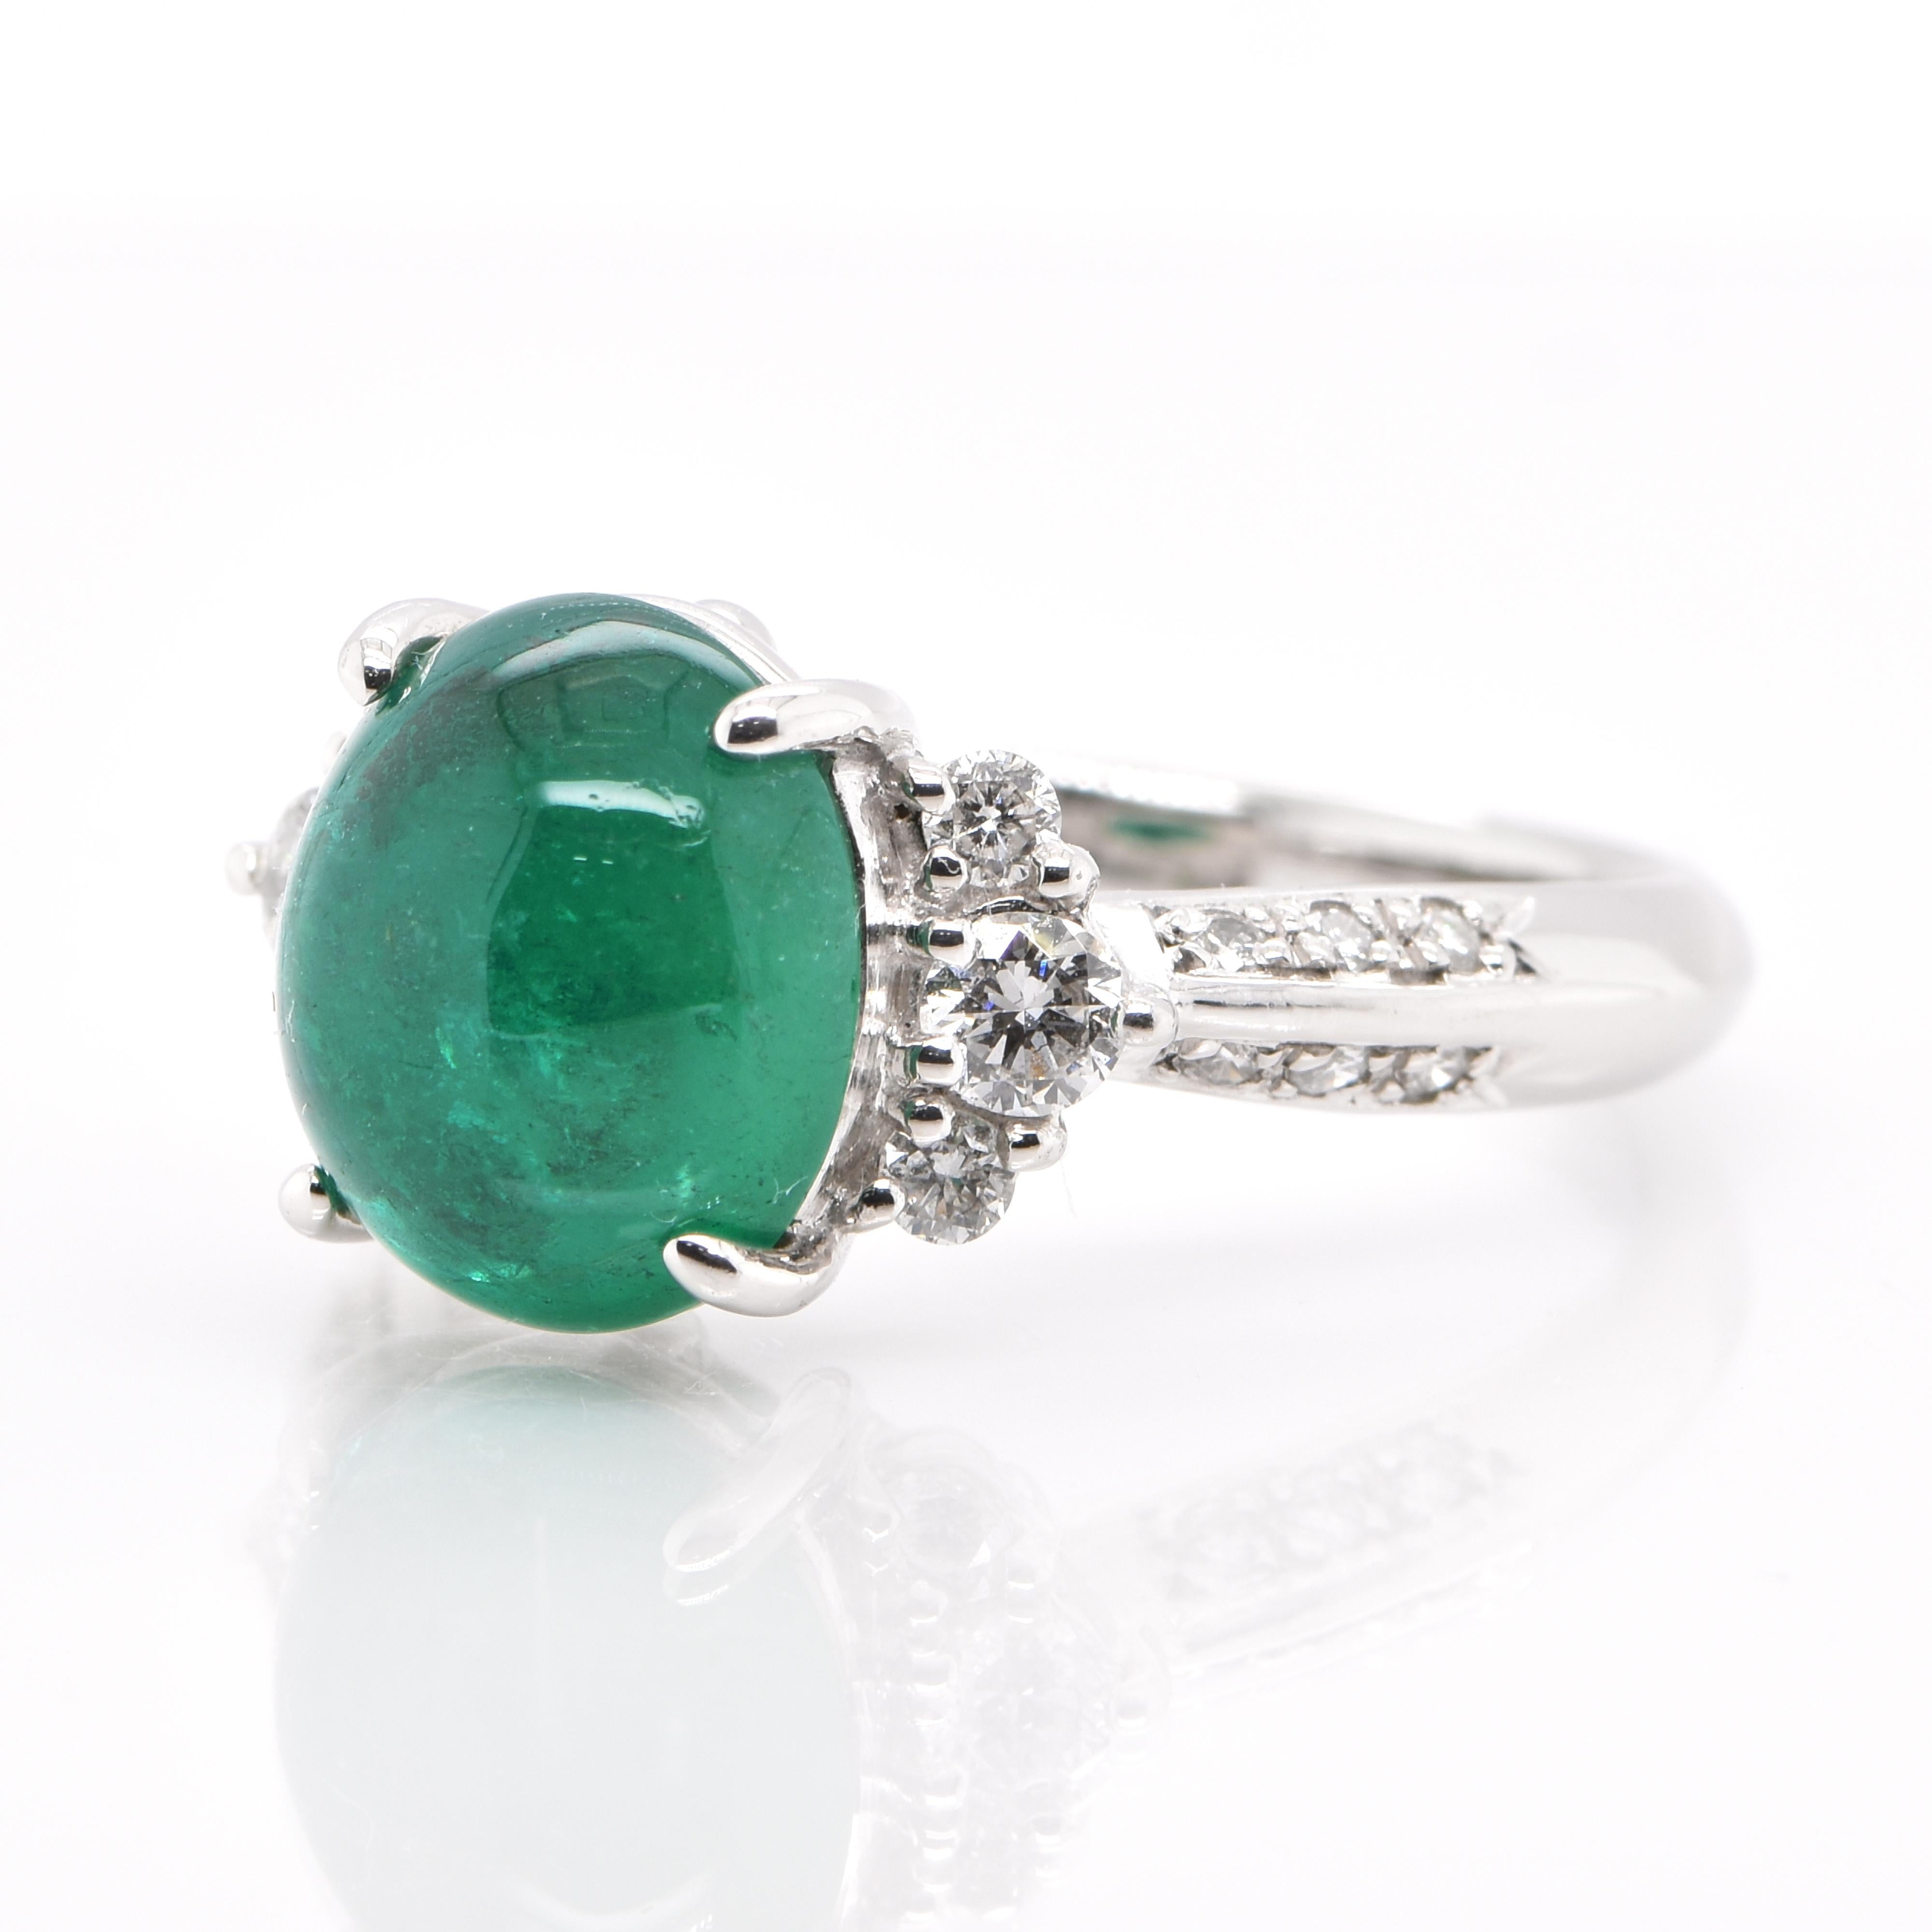 Modern 3.97 Carat, Natural, Colombian Emerald Cabochon and Diamond Ring Set in Platinum